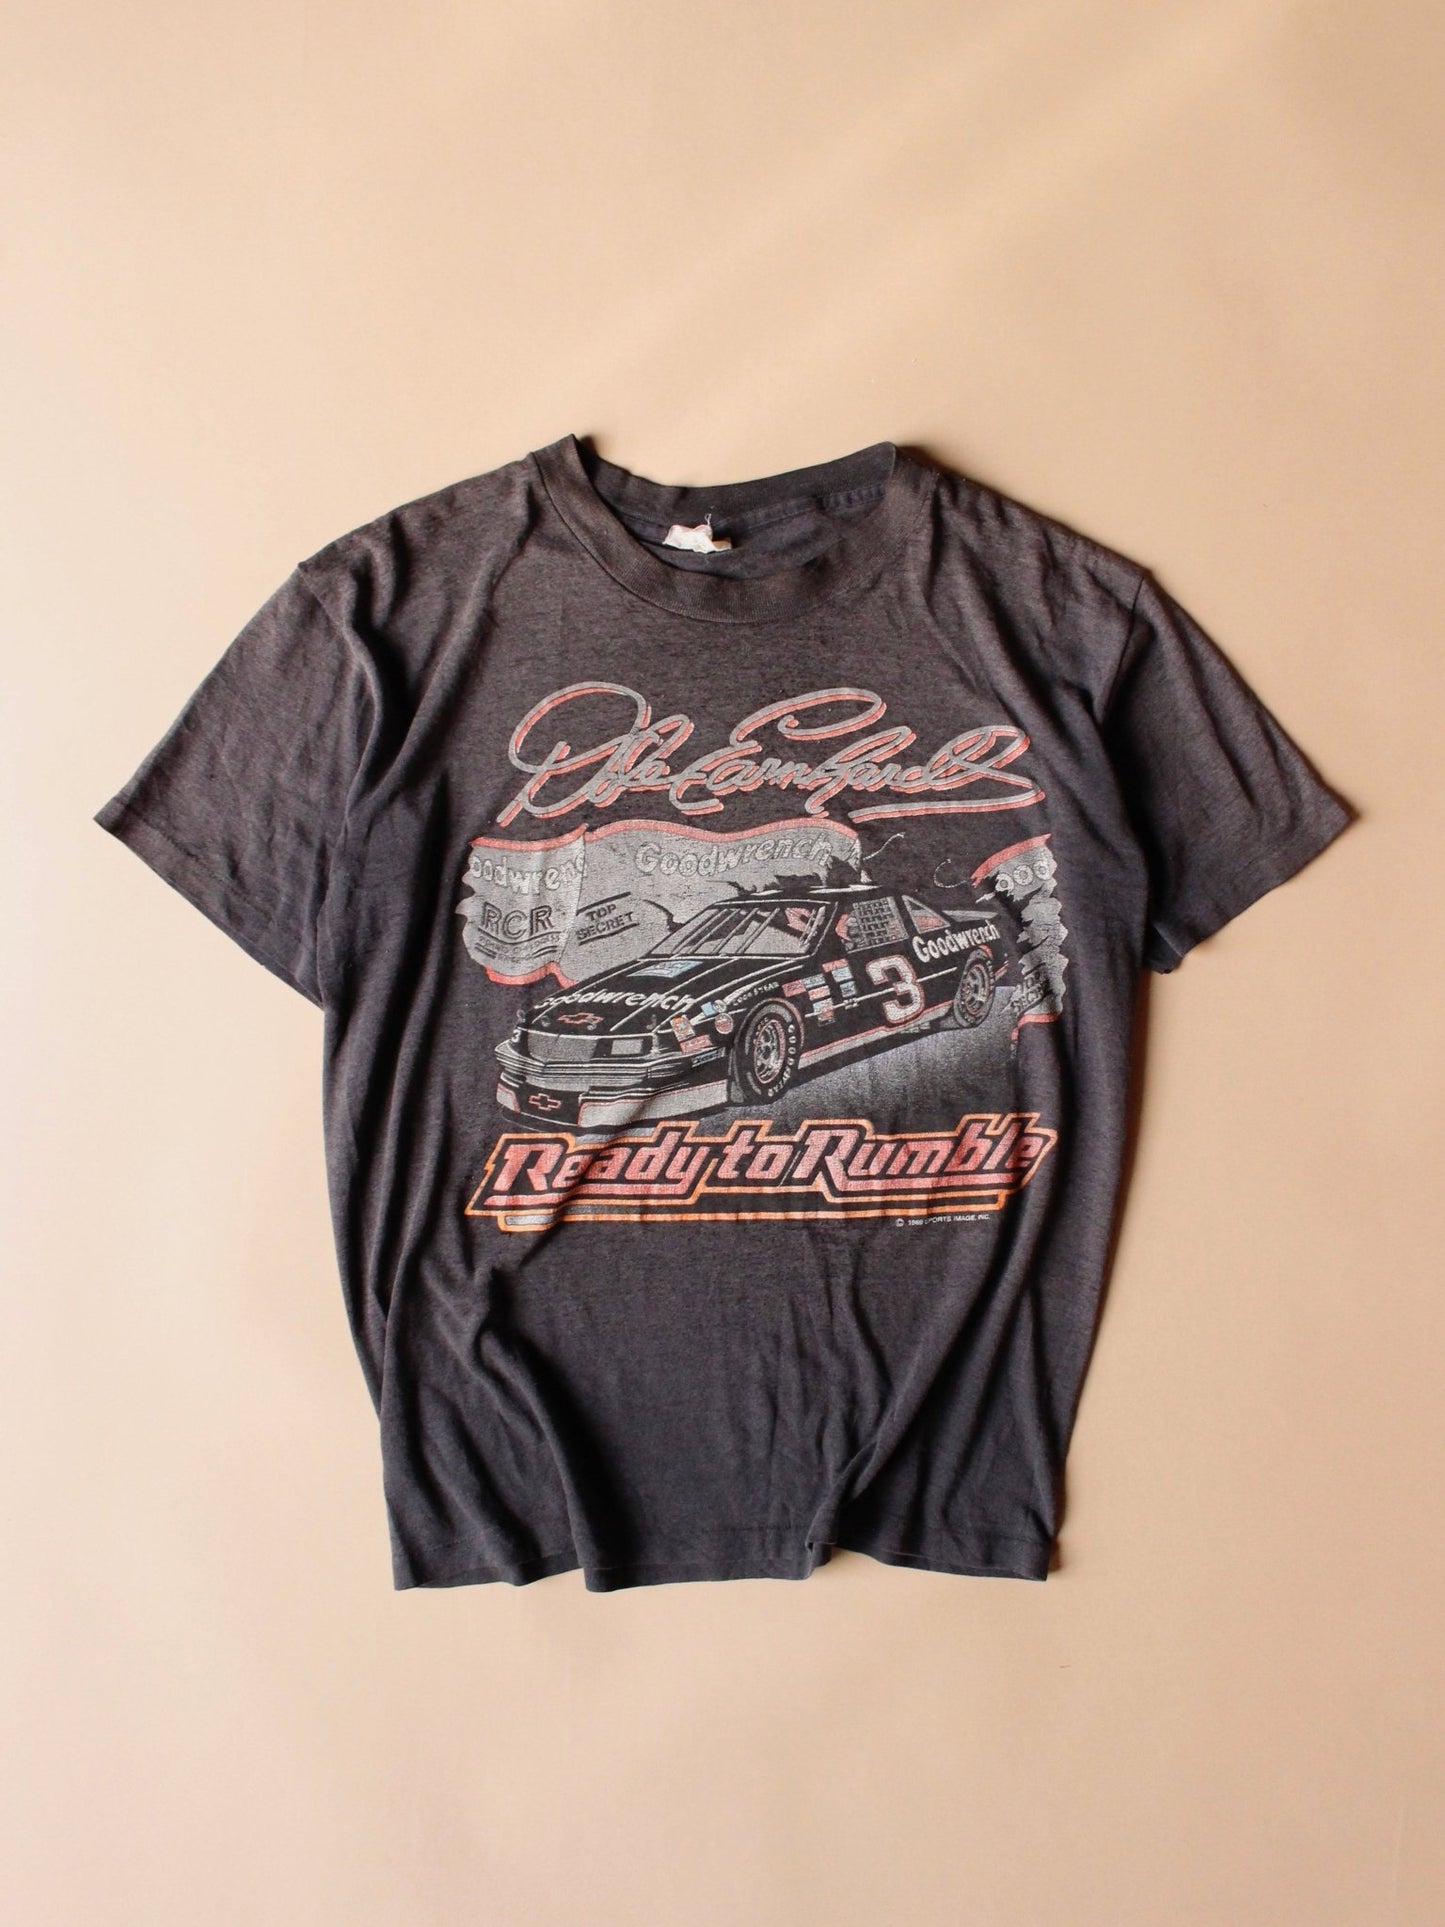 1989 Faded Dale Earnhardt “Ready To Rumble” Racing Tee